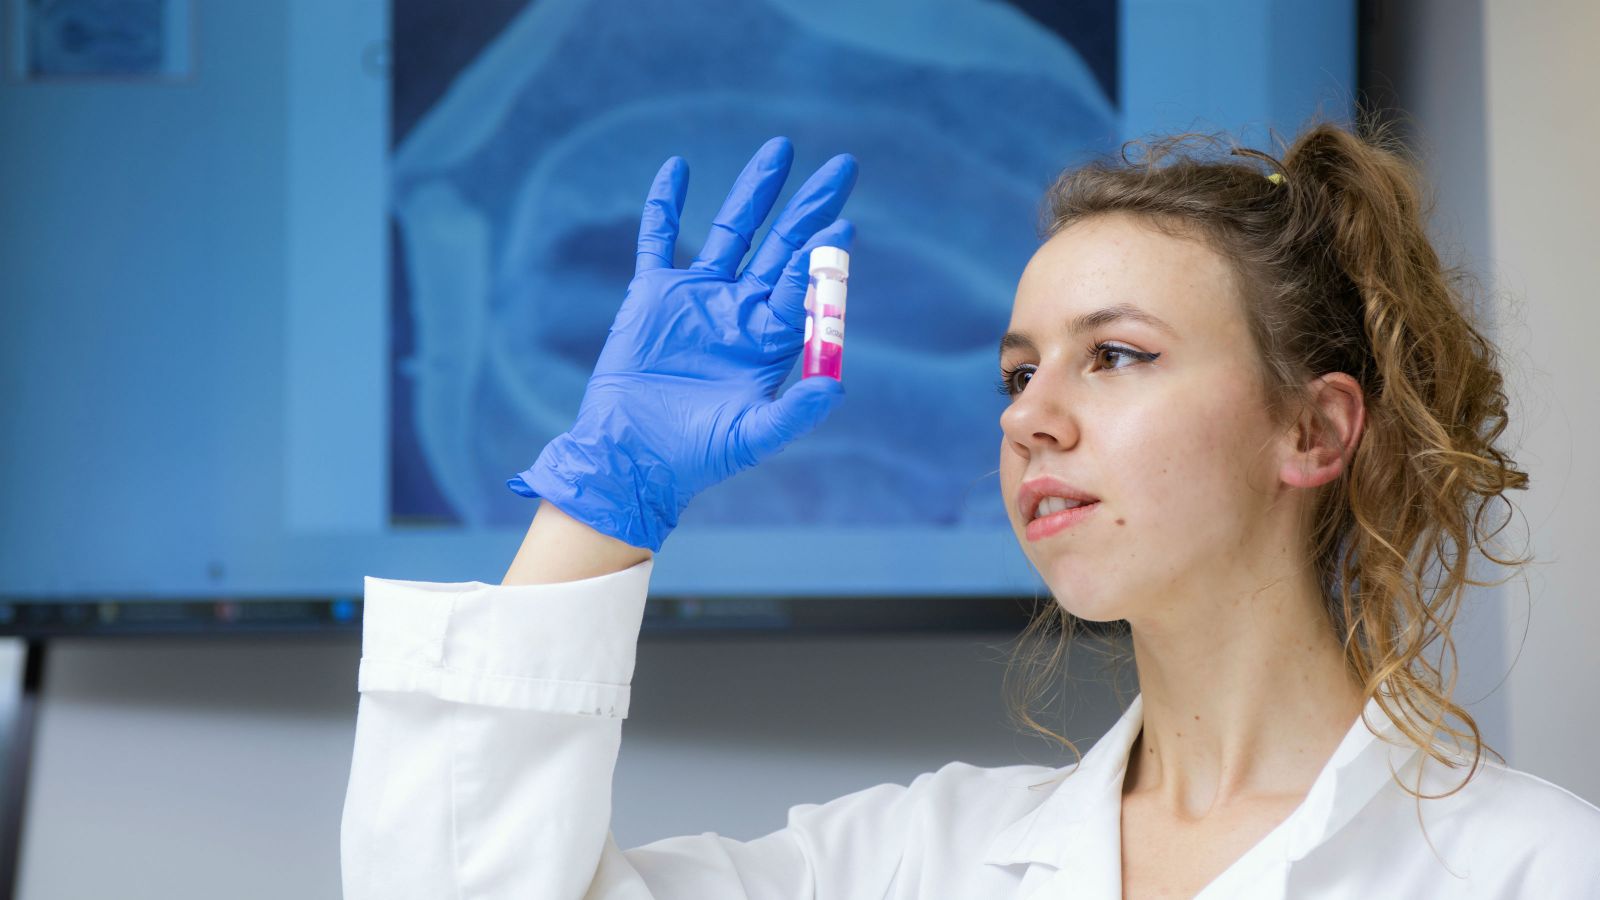 Alinor, wearing a lab coat and a blue plastic glove, holds up a vial of pink liquid. 